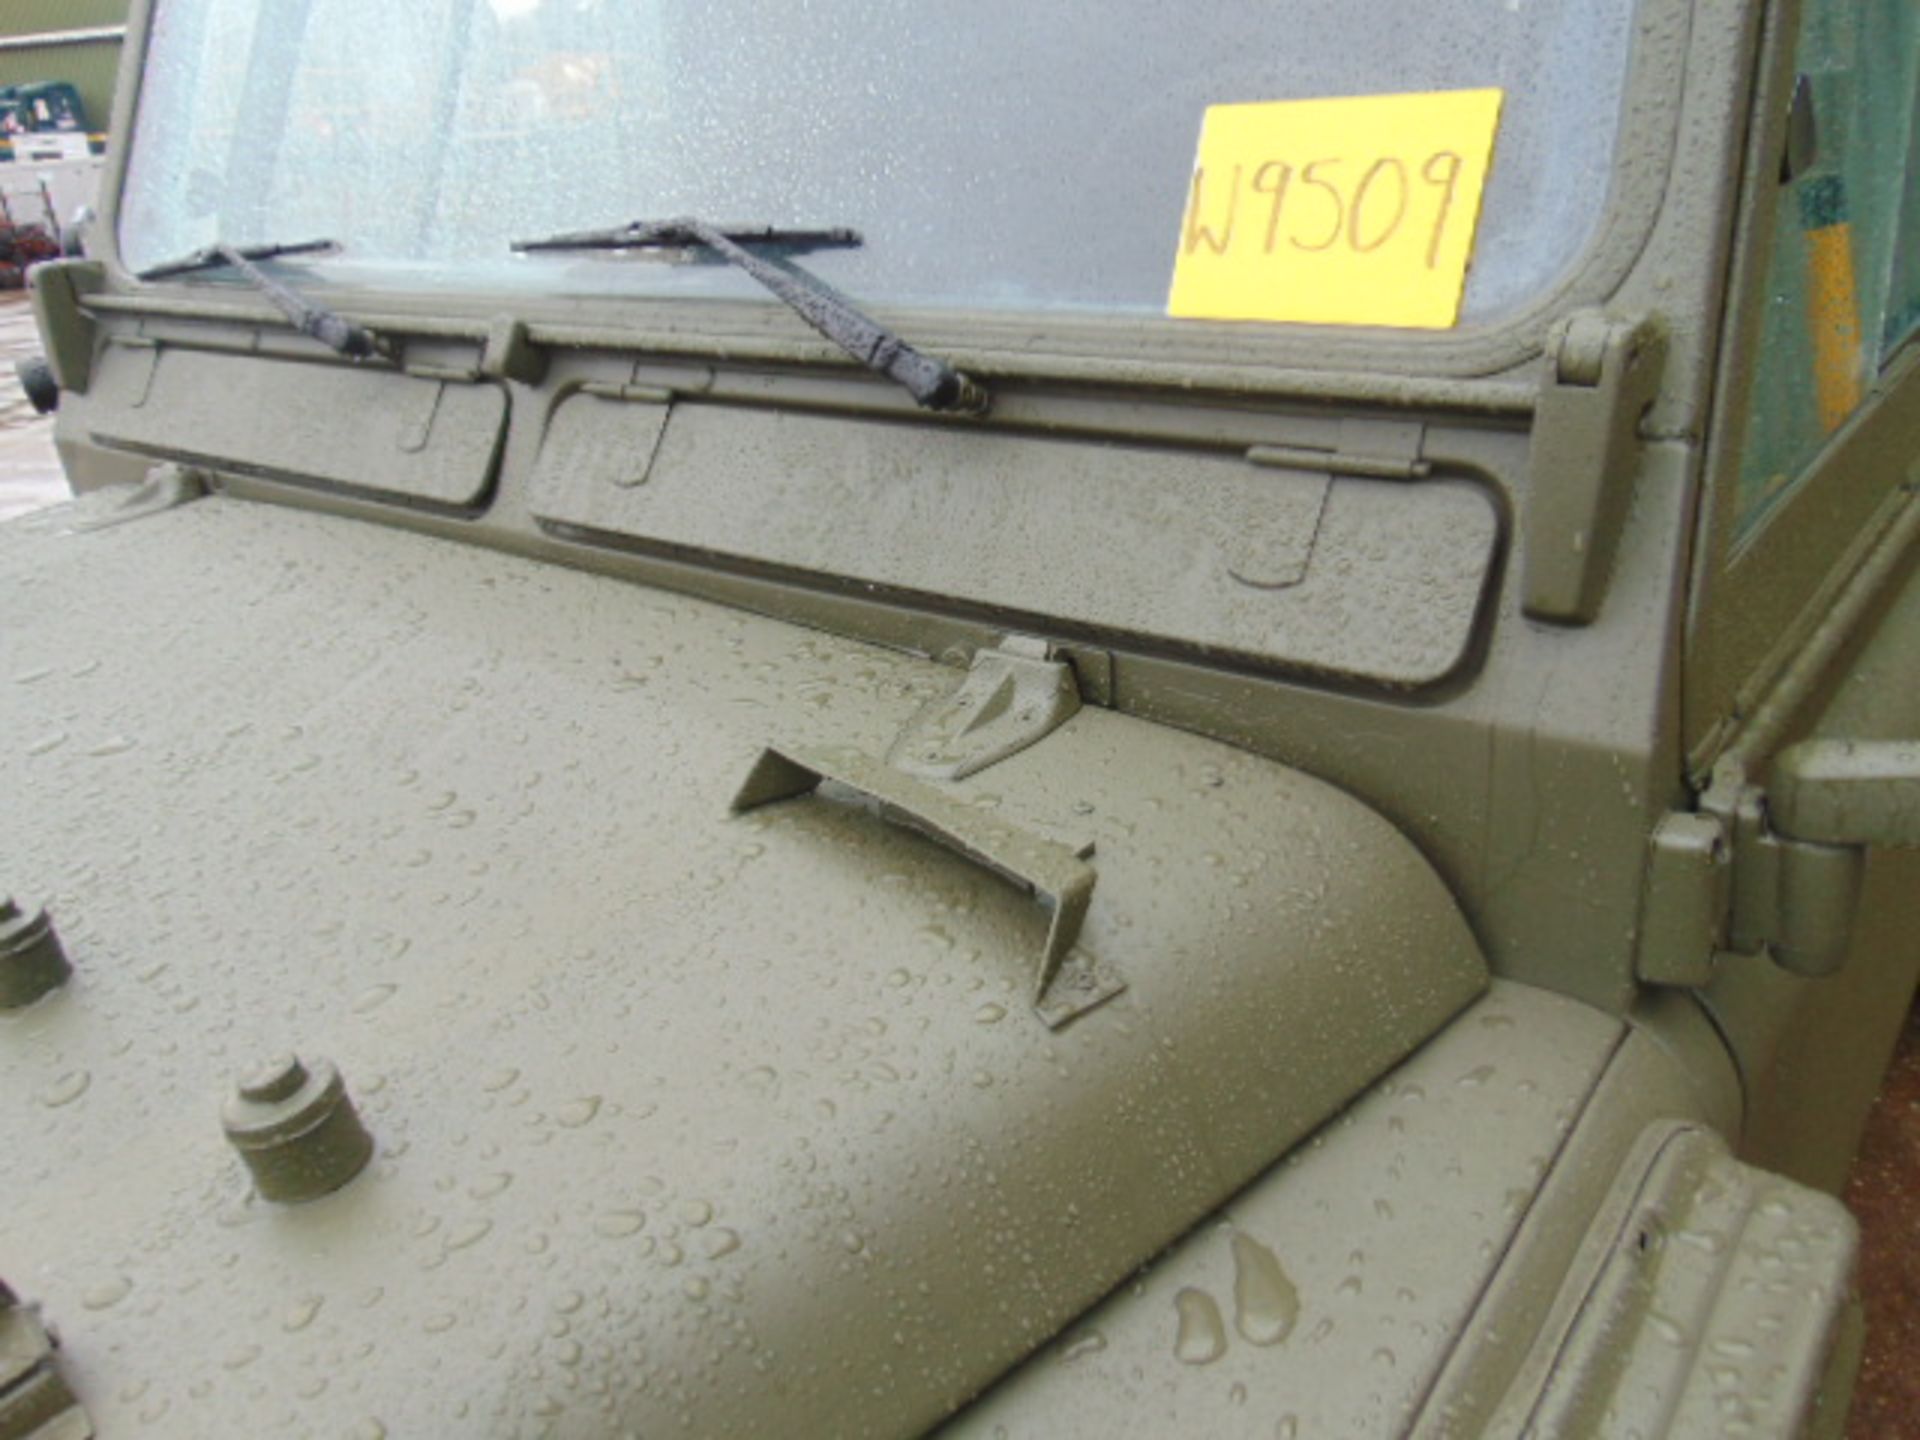 Military Specification Land Rover Wolf 110 Hard Top Left Hand Drive - Image 14 of 25